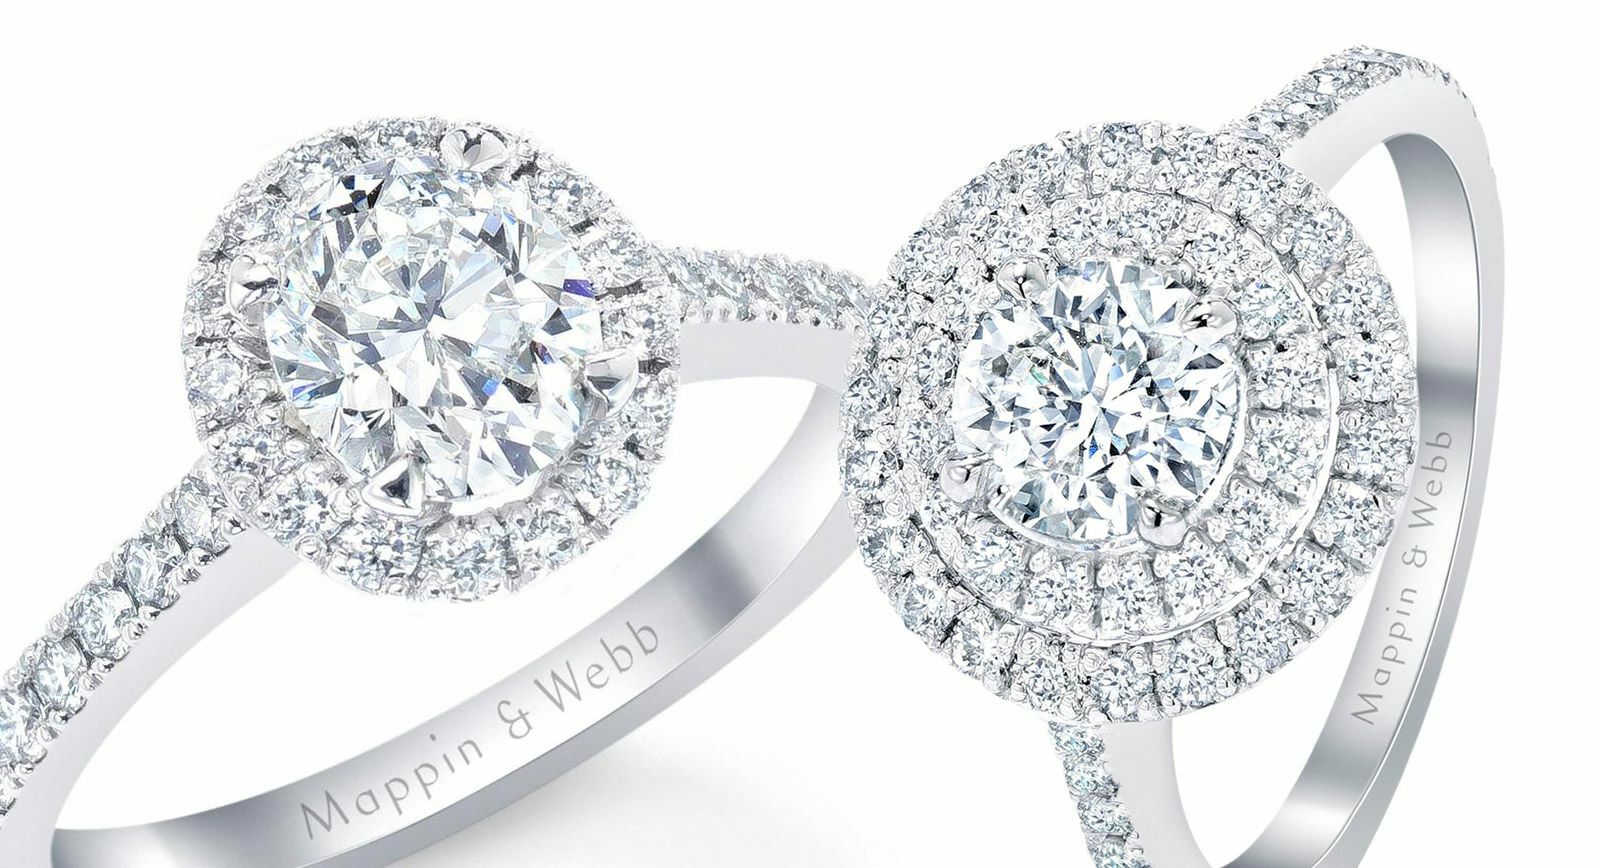 Mappin&Webb By Appointment Service: An Engagement Ring Of Your Dreams